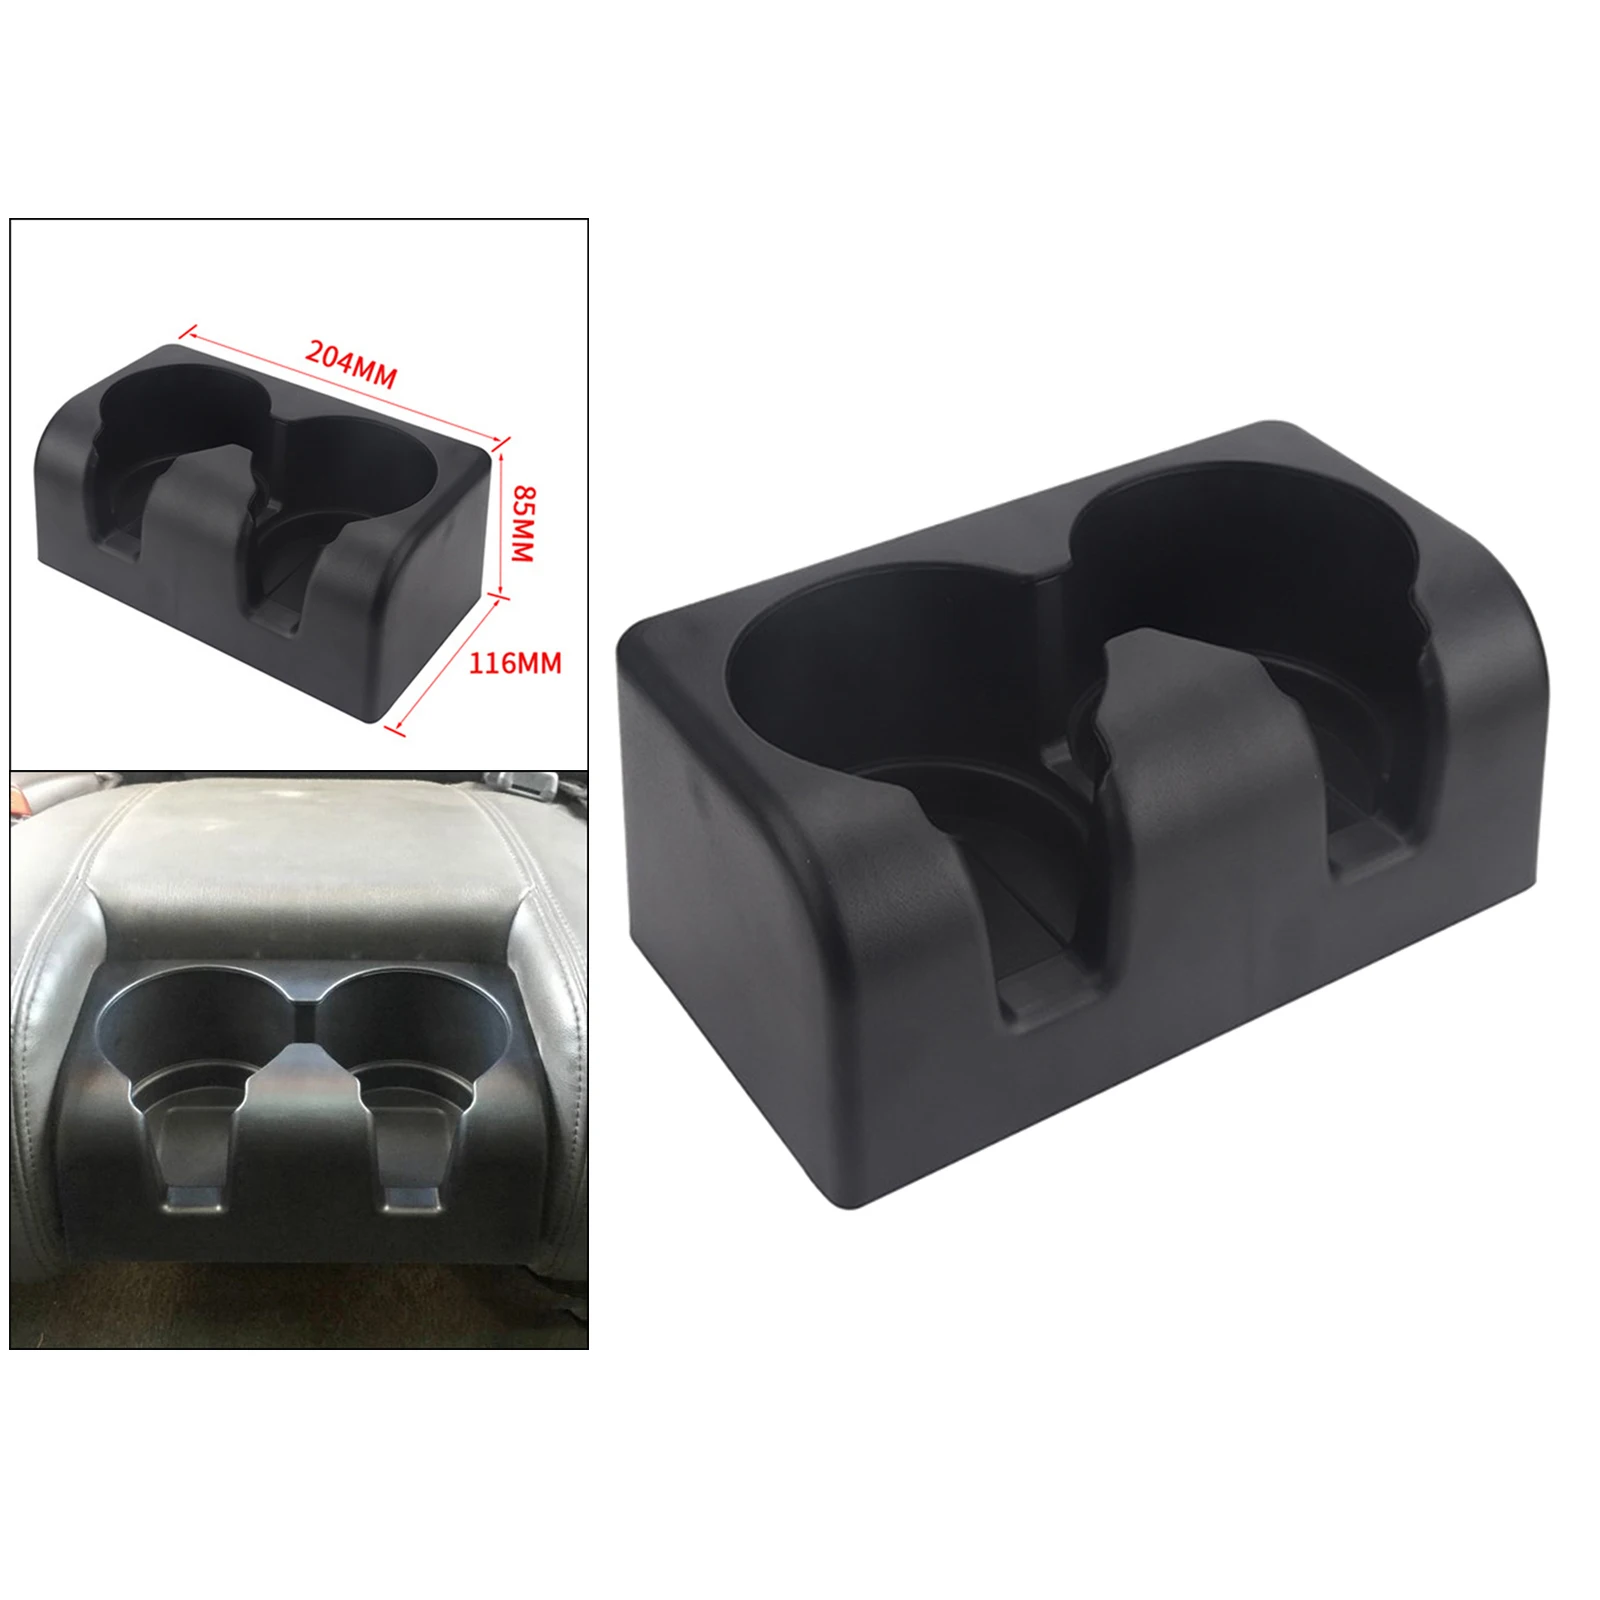 Rear Center Console Insert Dual Cup Holder Double Storage for Colorado for Canyon 2004-12 19256630 89039575 Interior Decoration